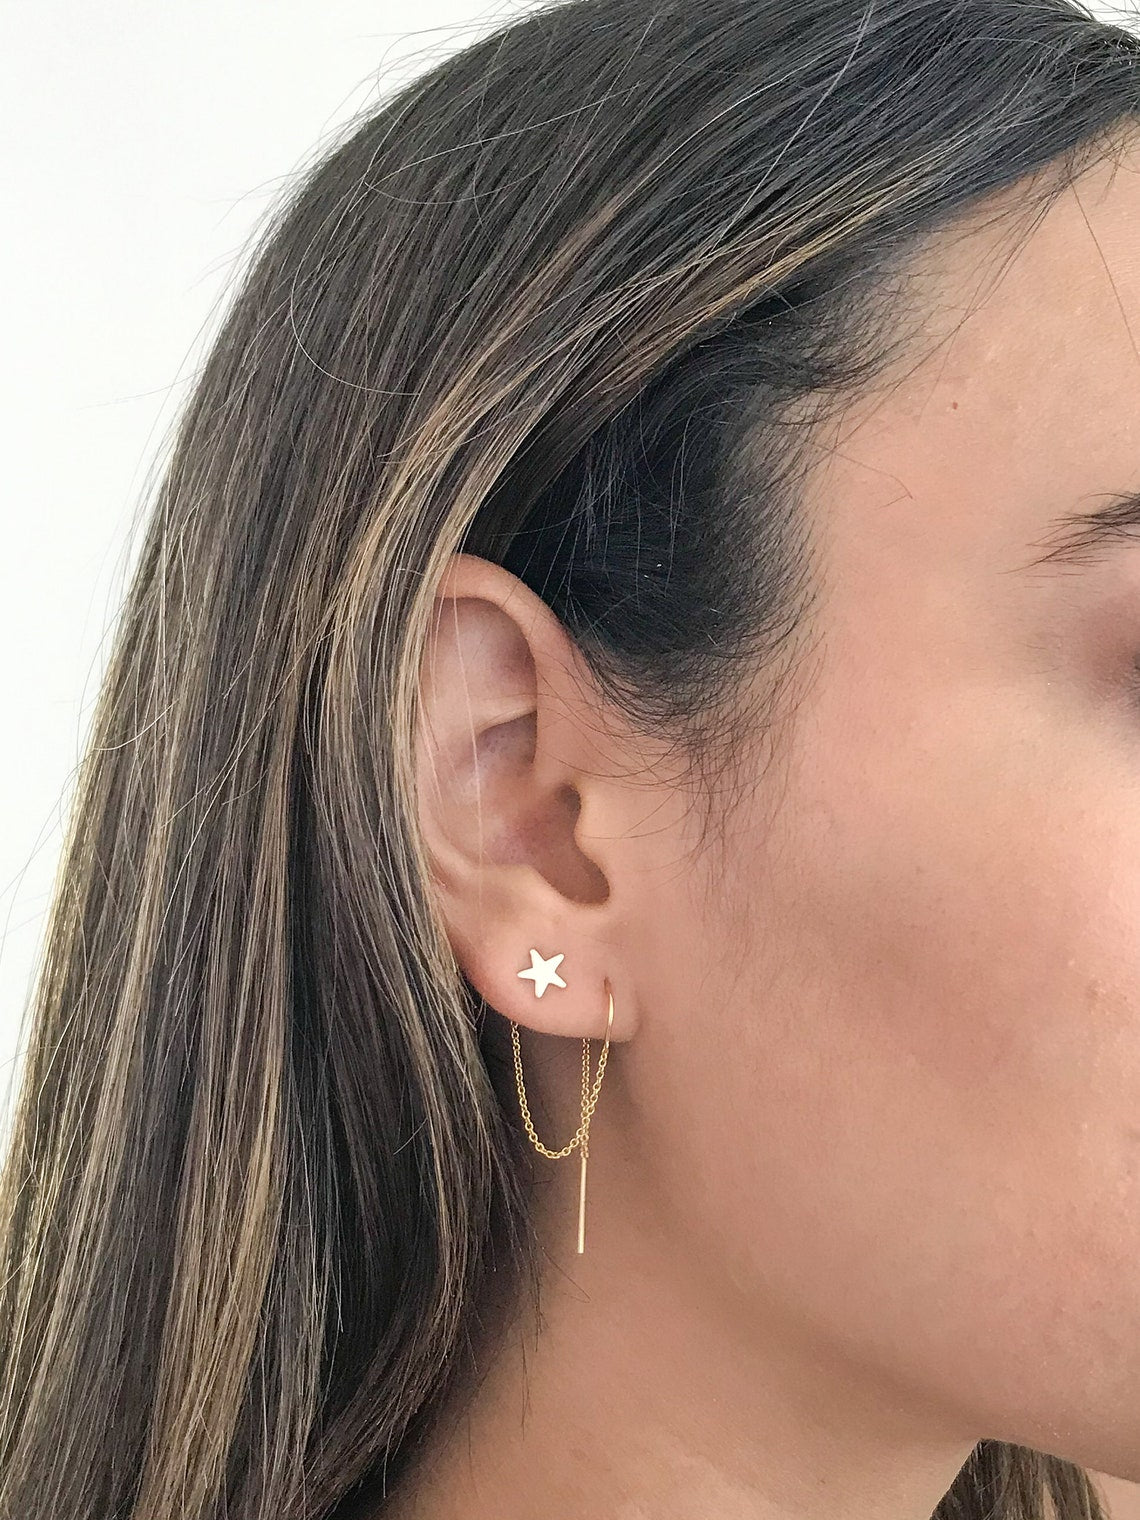 The Perfect Second Ear Piercing | Galleria Armadoro